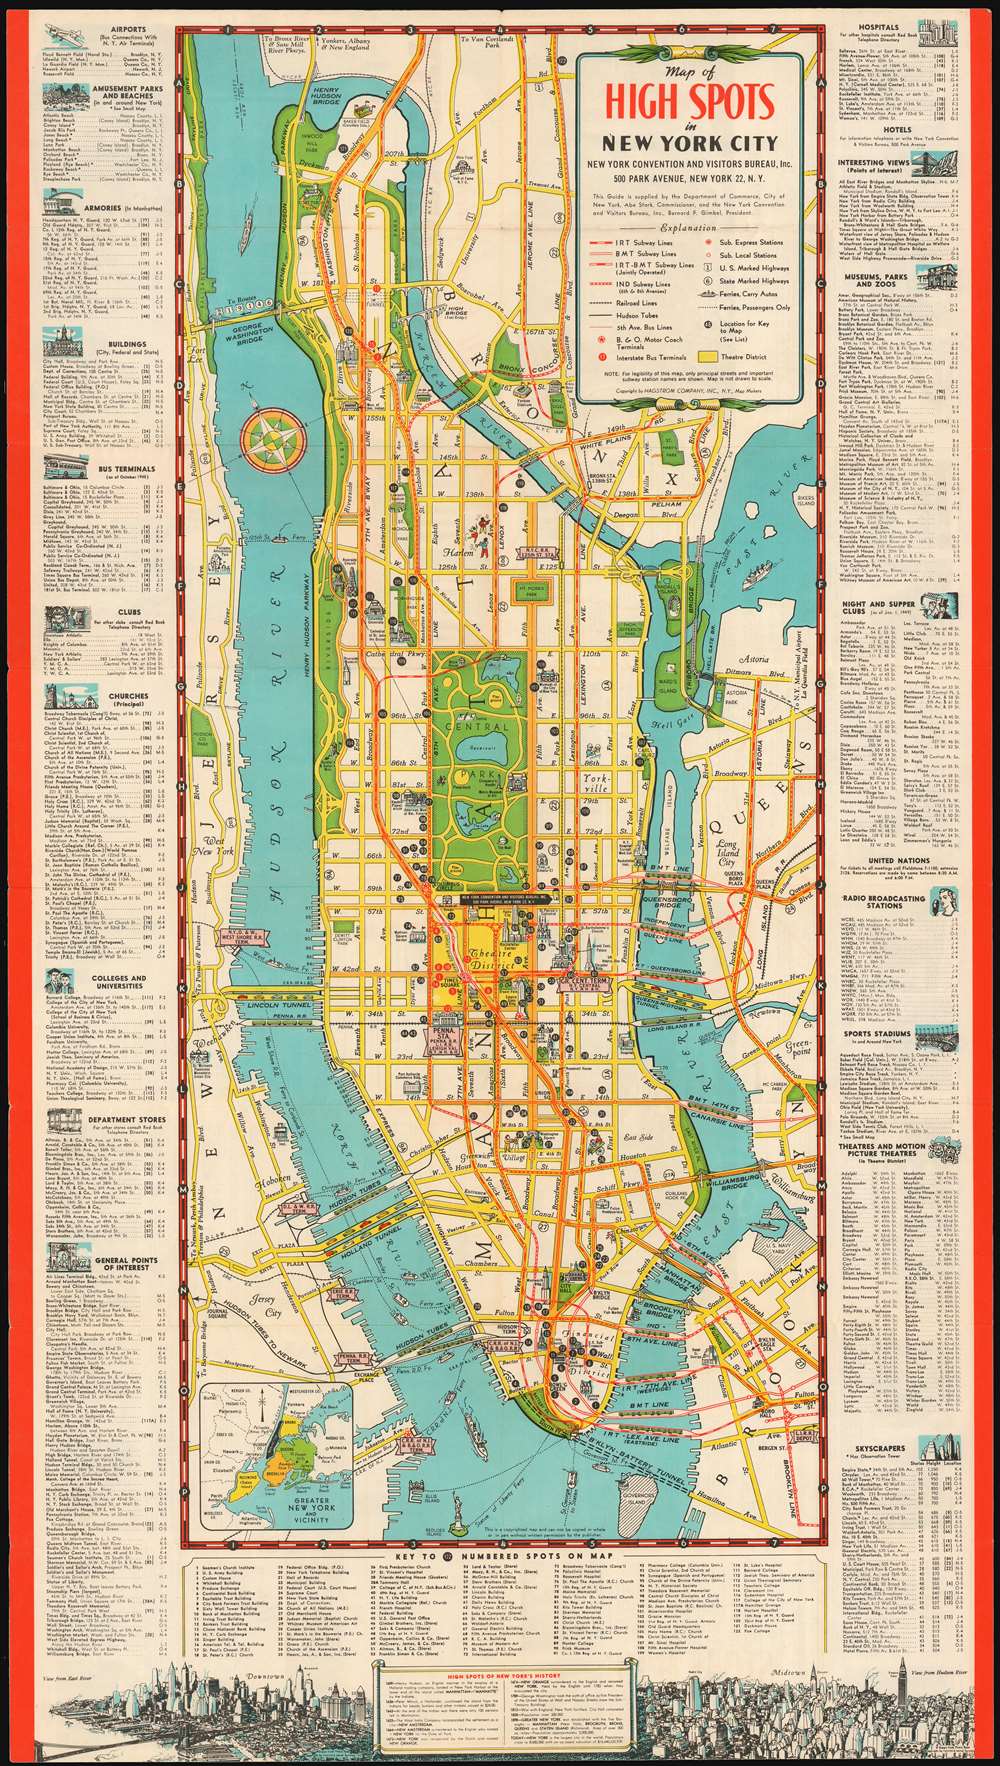 tourist map of new york Map Of High Spots In New York City Geographicus Rare Antique Maps tourist map of new york